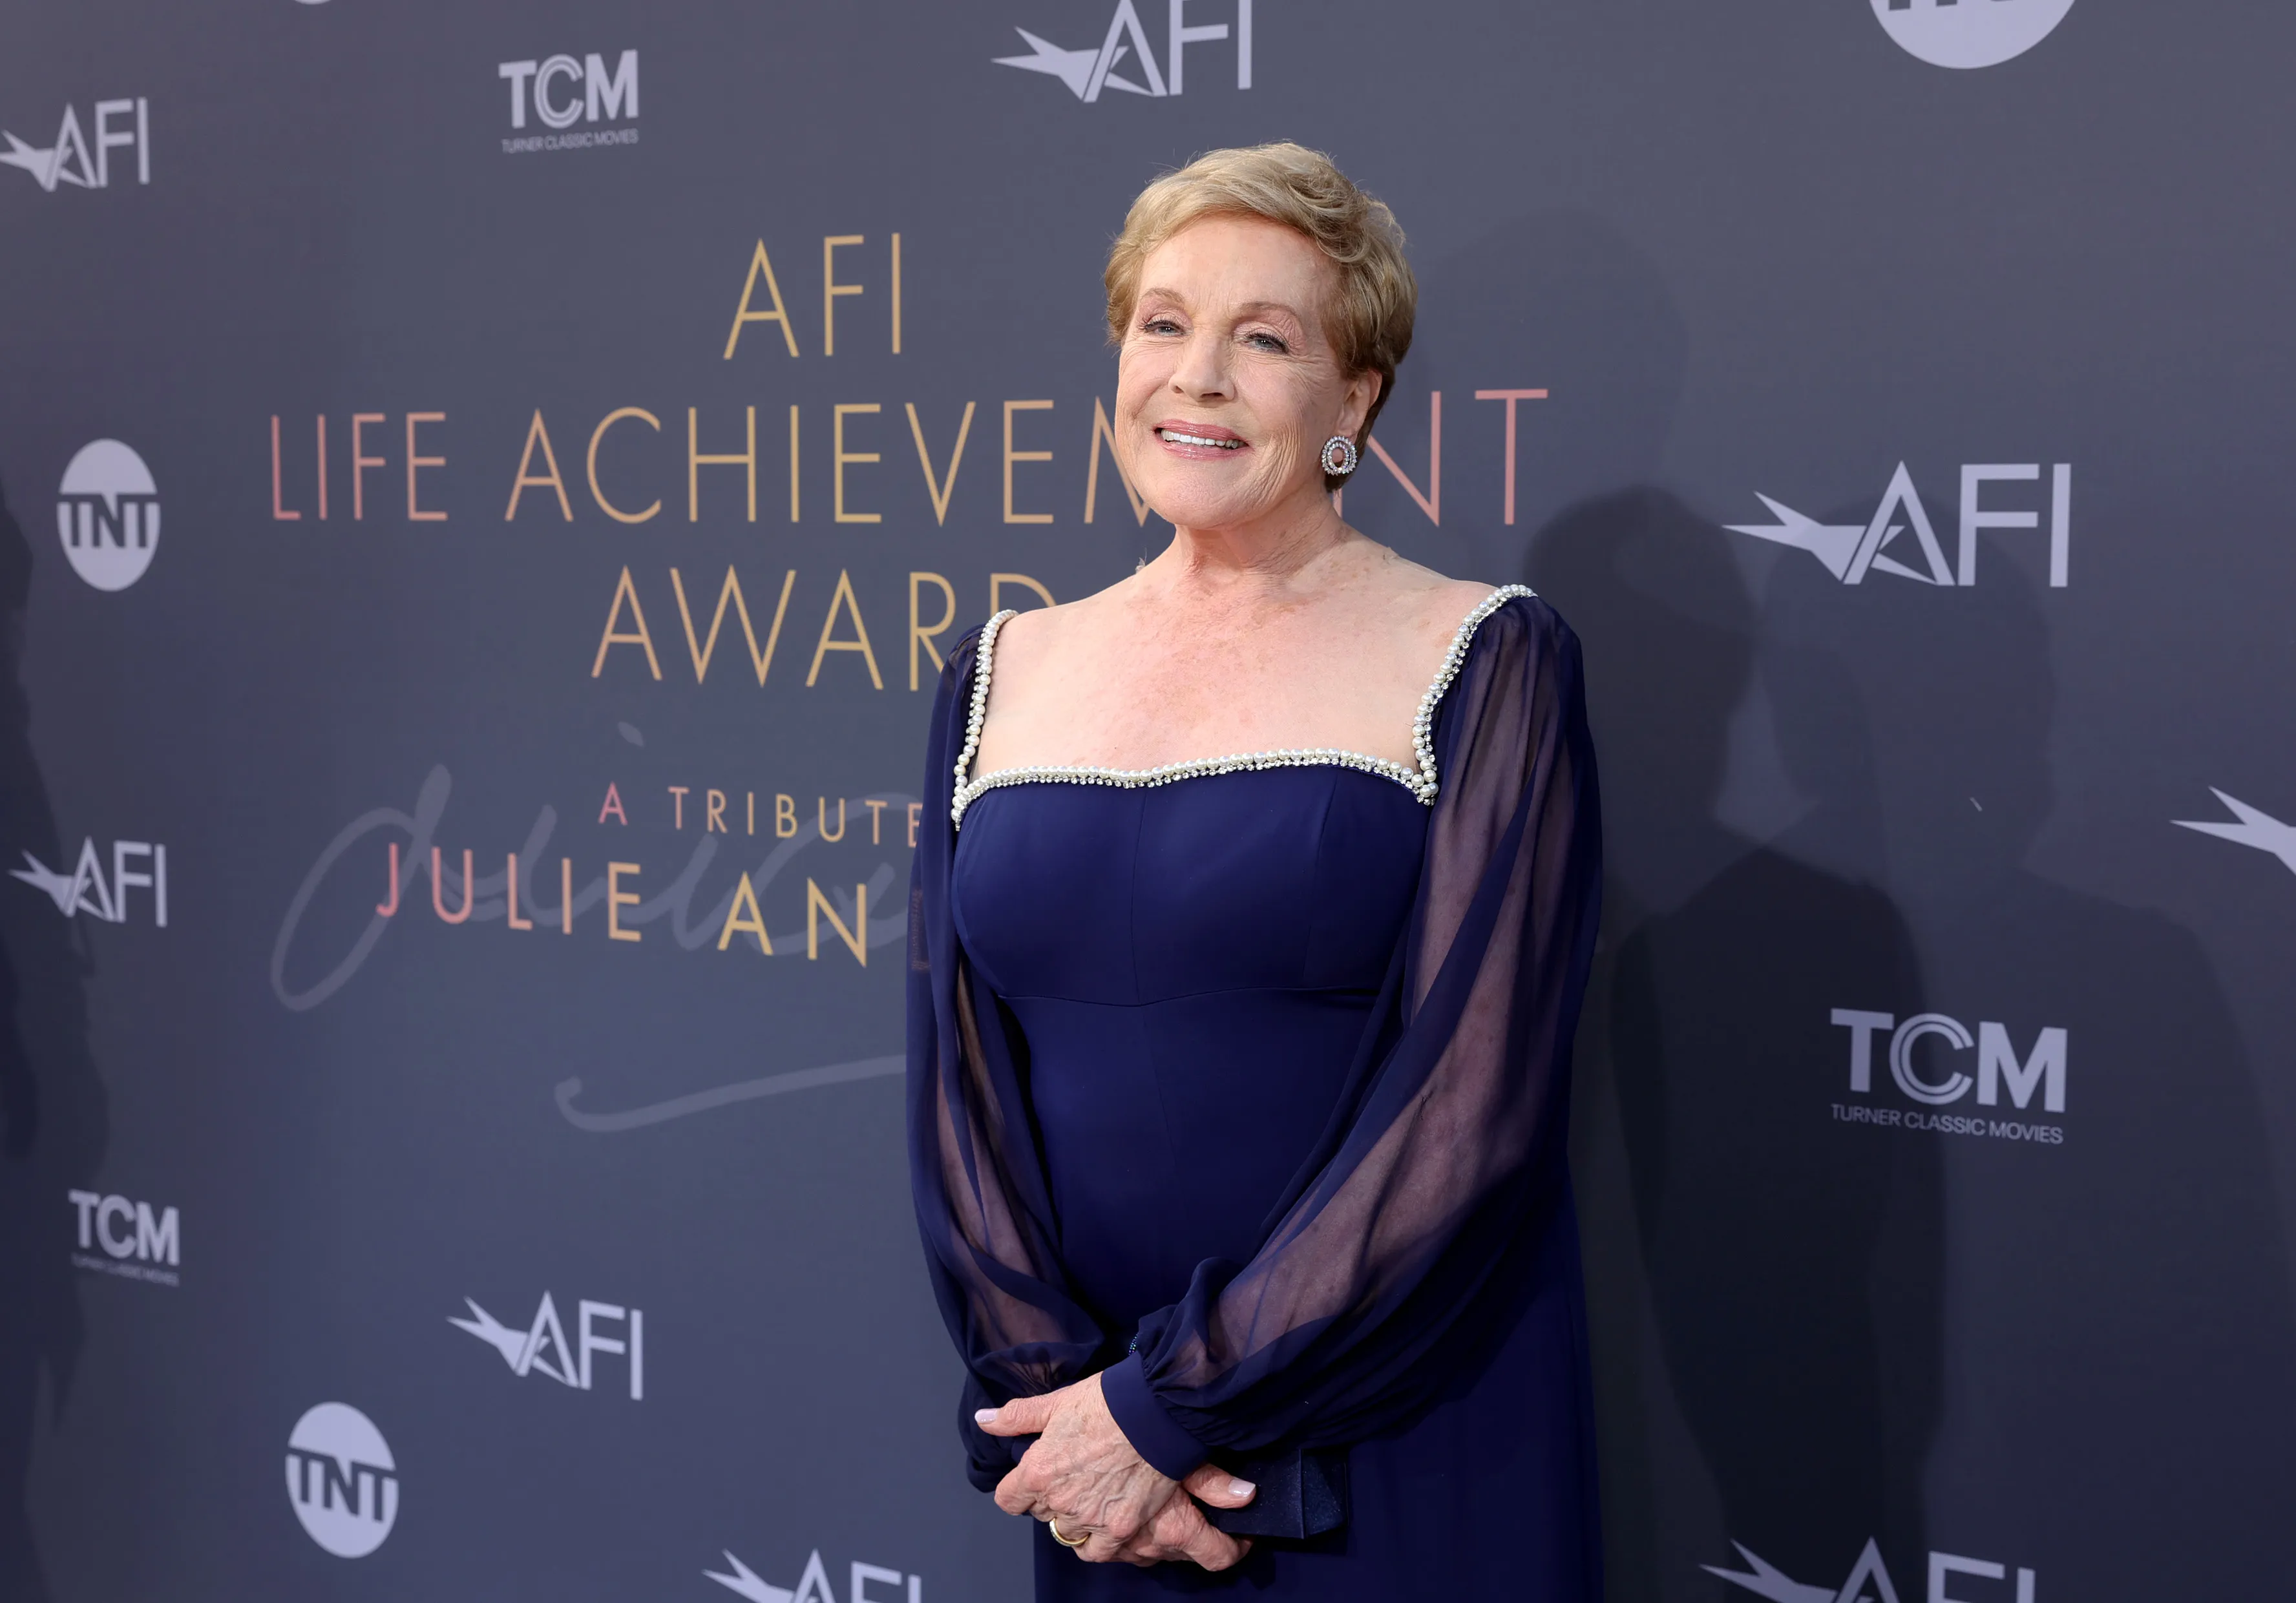 HOLLYWOOD, CALIFORNIA - JUNE 09: Honoree Julie Andrews attends the 48th Annual AFI Life Achievement Award Honoring Julie Andrews at Dolby Theatre on June 09, 2022 in Hollywood, California. (Photo by Emma McIntyre/Getty Images for TNT)